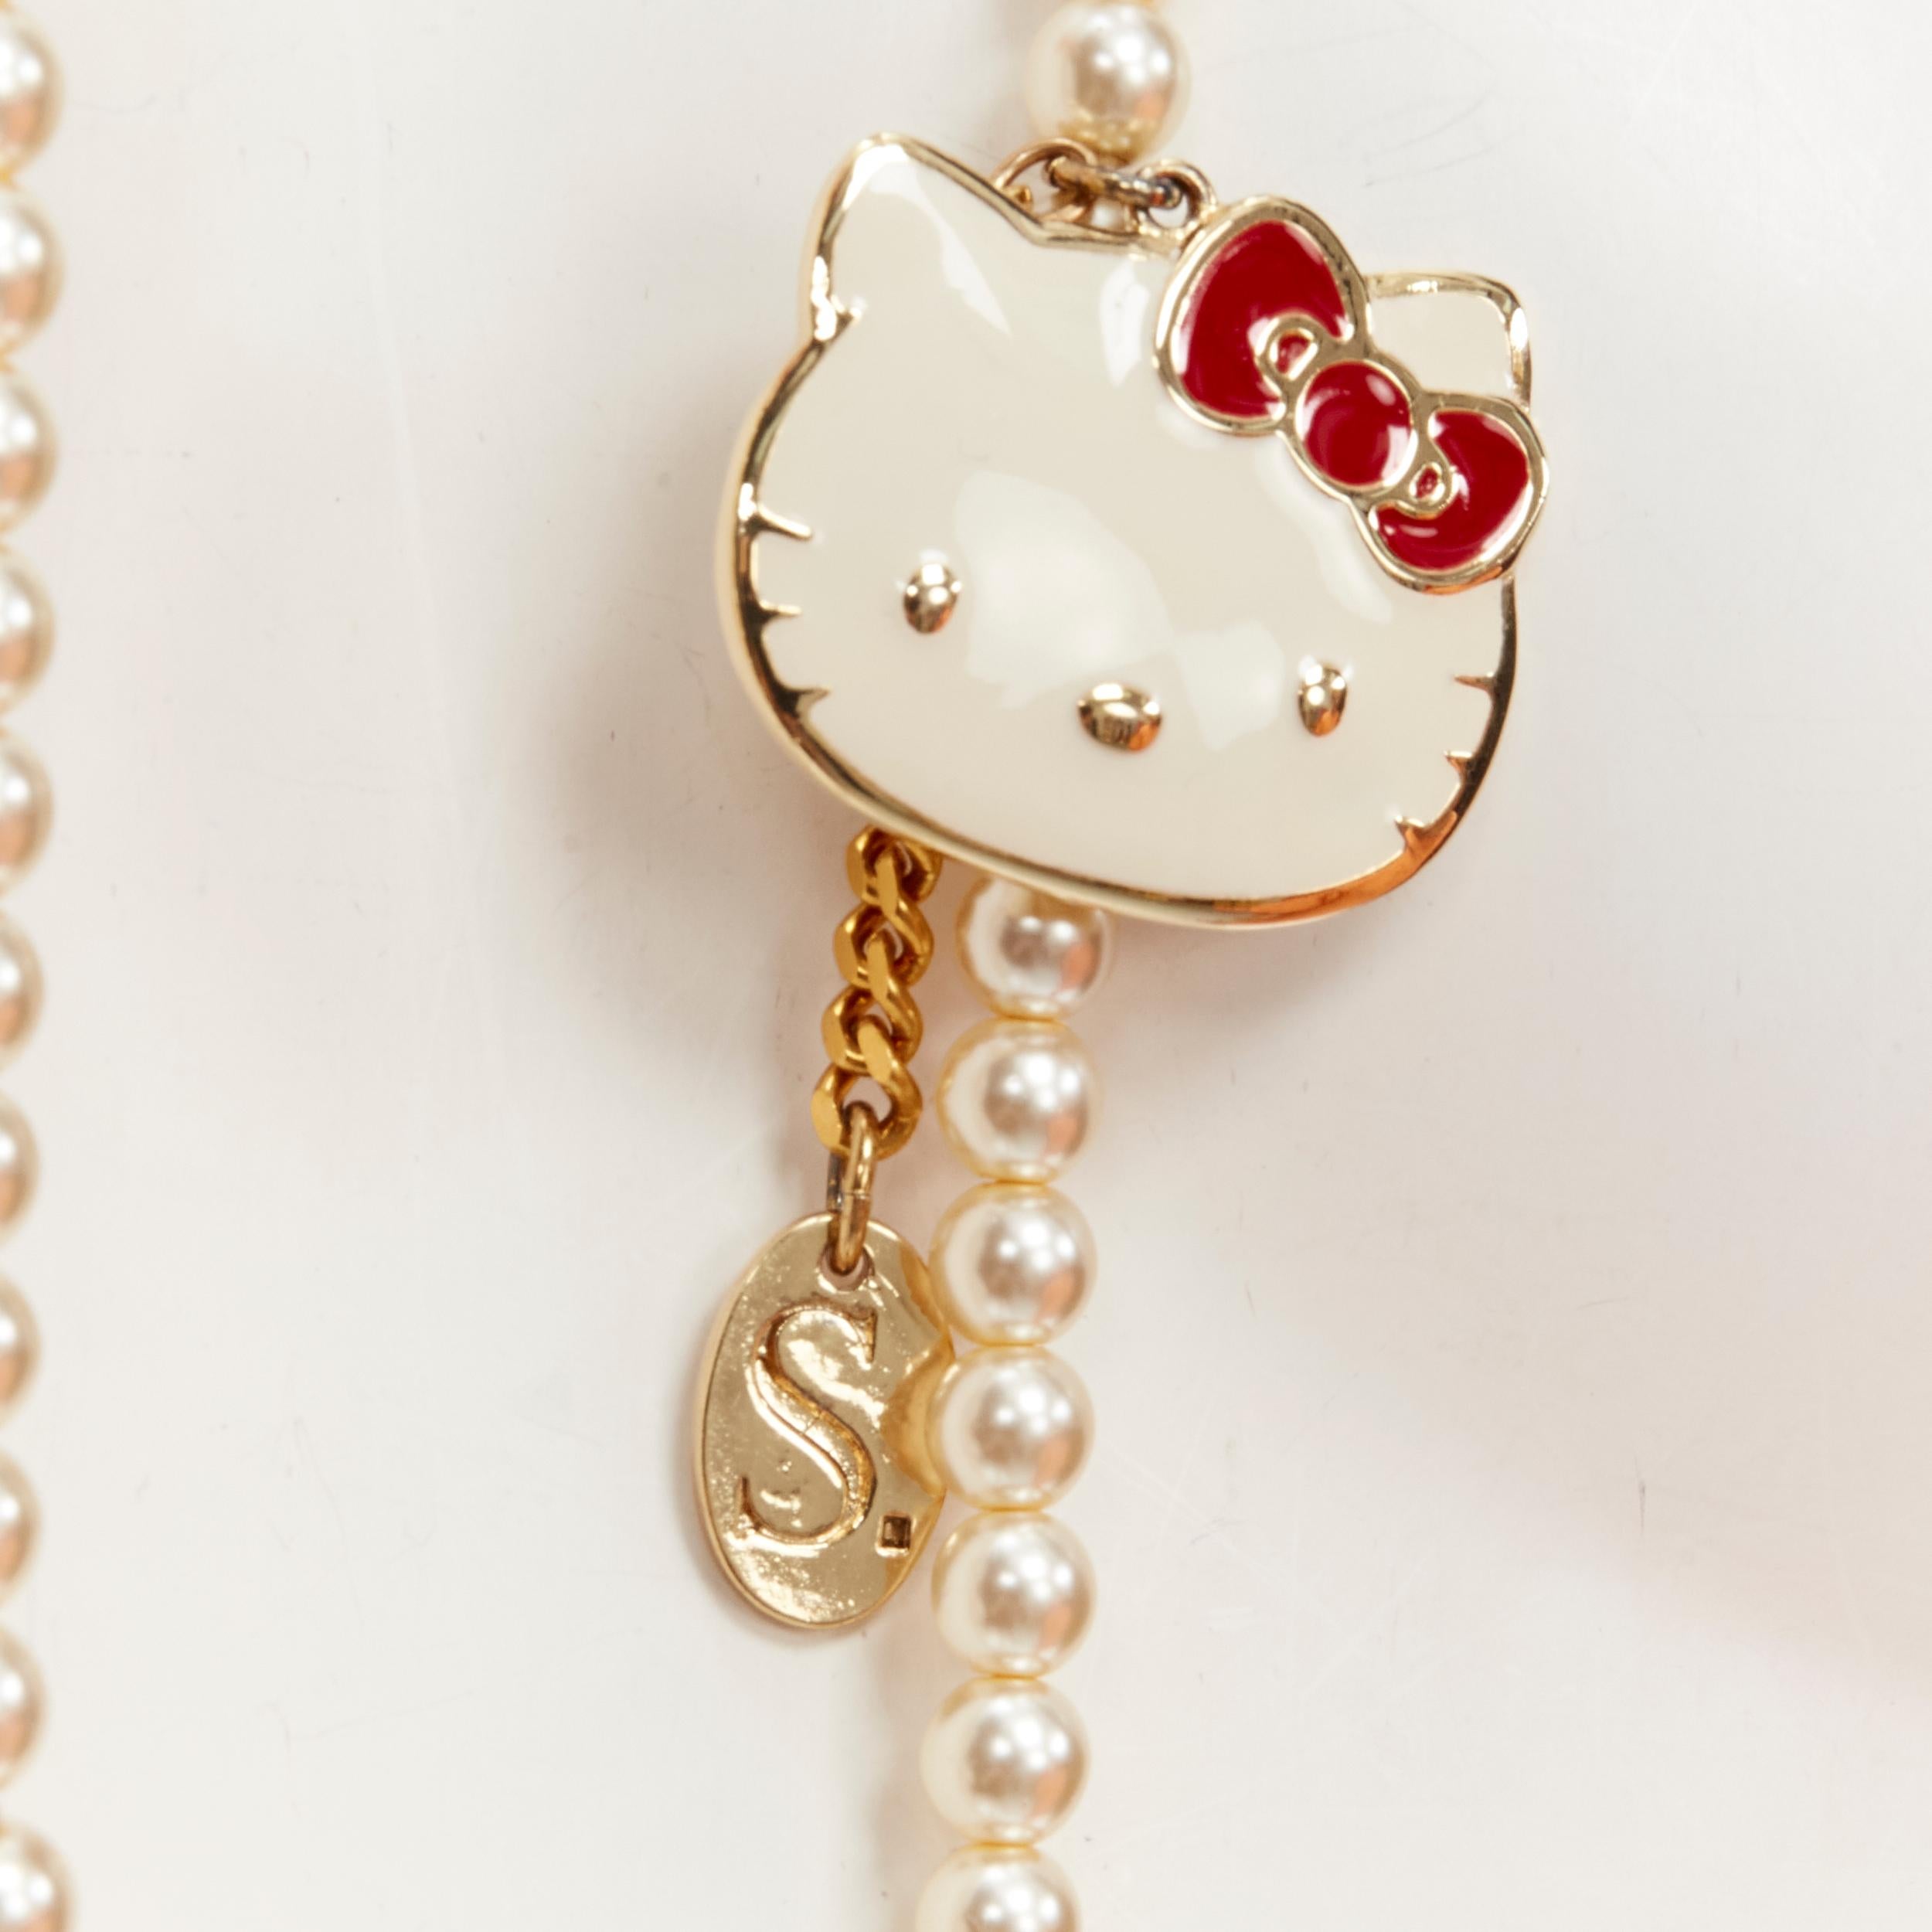 LE BIJOUX DE SOPHIE Hello Kitty pearl cake bow necklace
Reference: ANWU/A00316
Brand: Le Bijoux De Sophie
Material: Faux Pearl, Plastic, Metal
Color: Pink, Pearl
Pattern: Cartoon
Closure: Lobster Clasp
Extra Details: Pink cake, teapot, bow and Hello